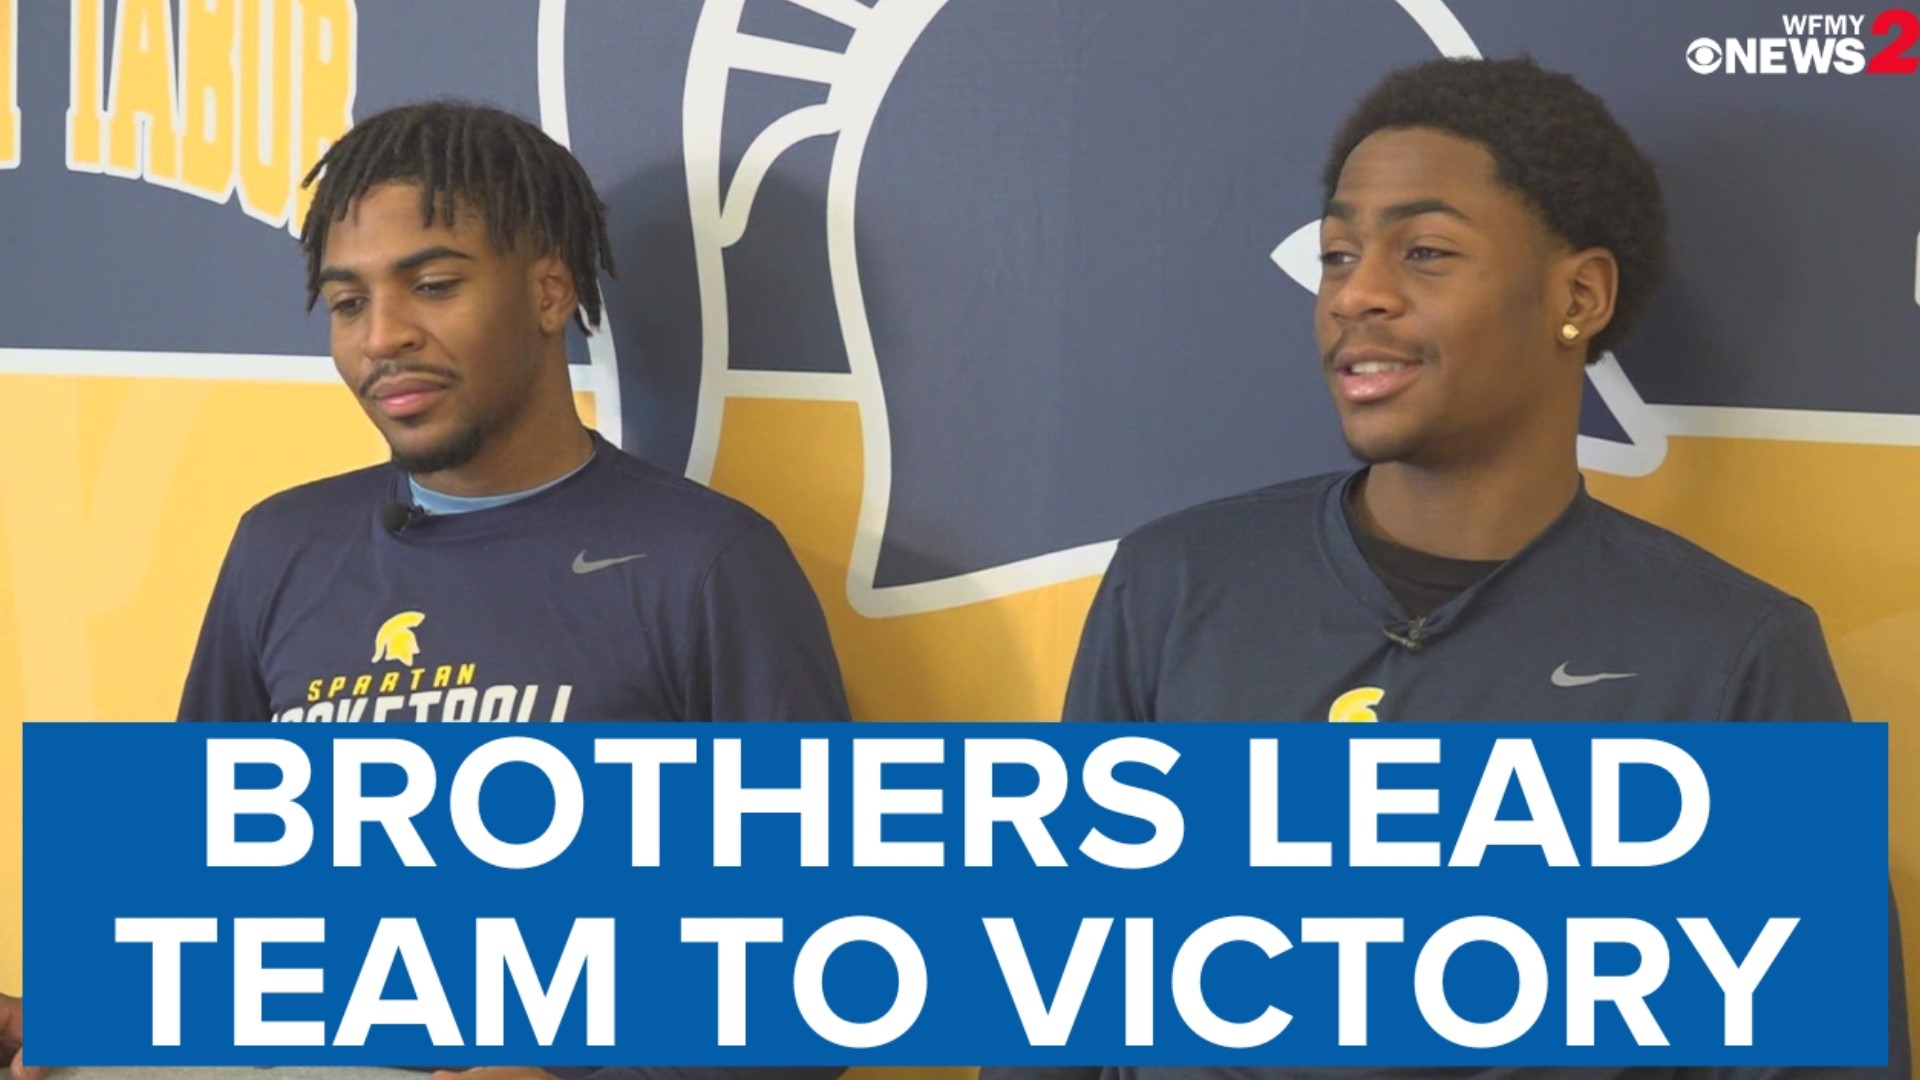 The Peterkin brothers helped lead Mount Tabor to 14-1 on the season.